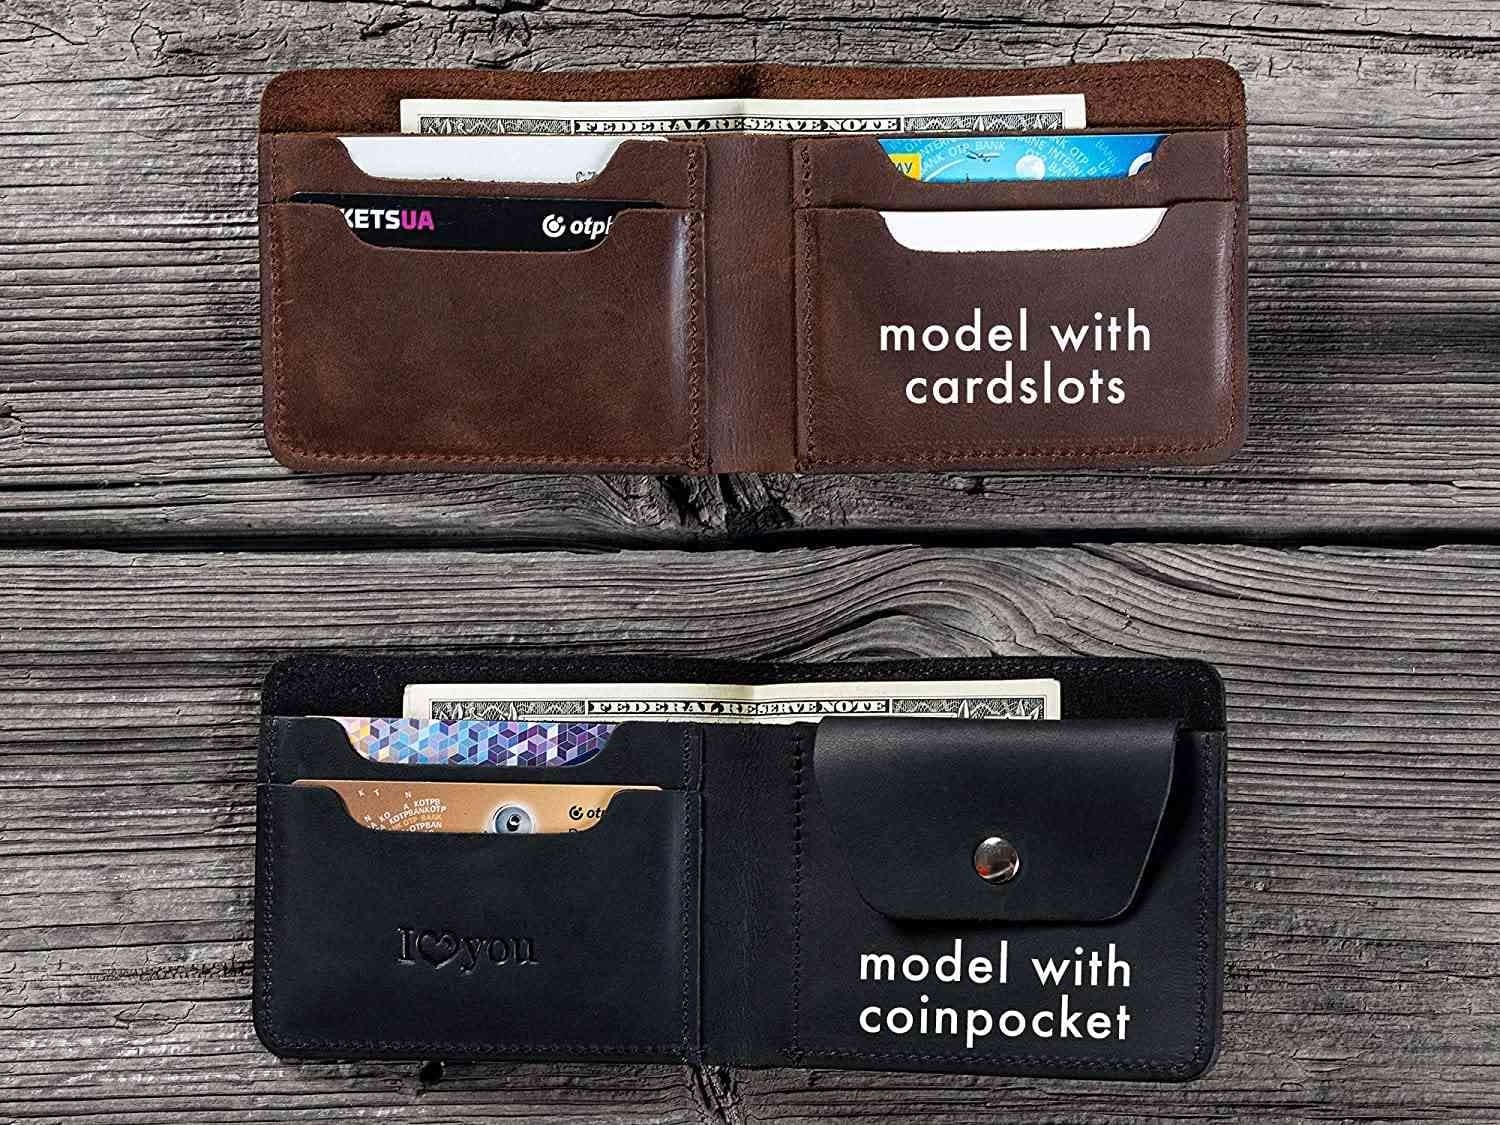 Wallet with Prints in the Style of Ray